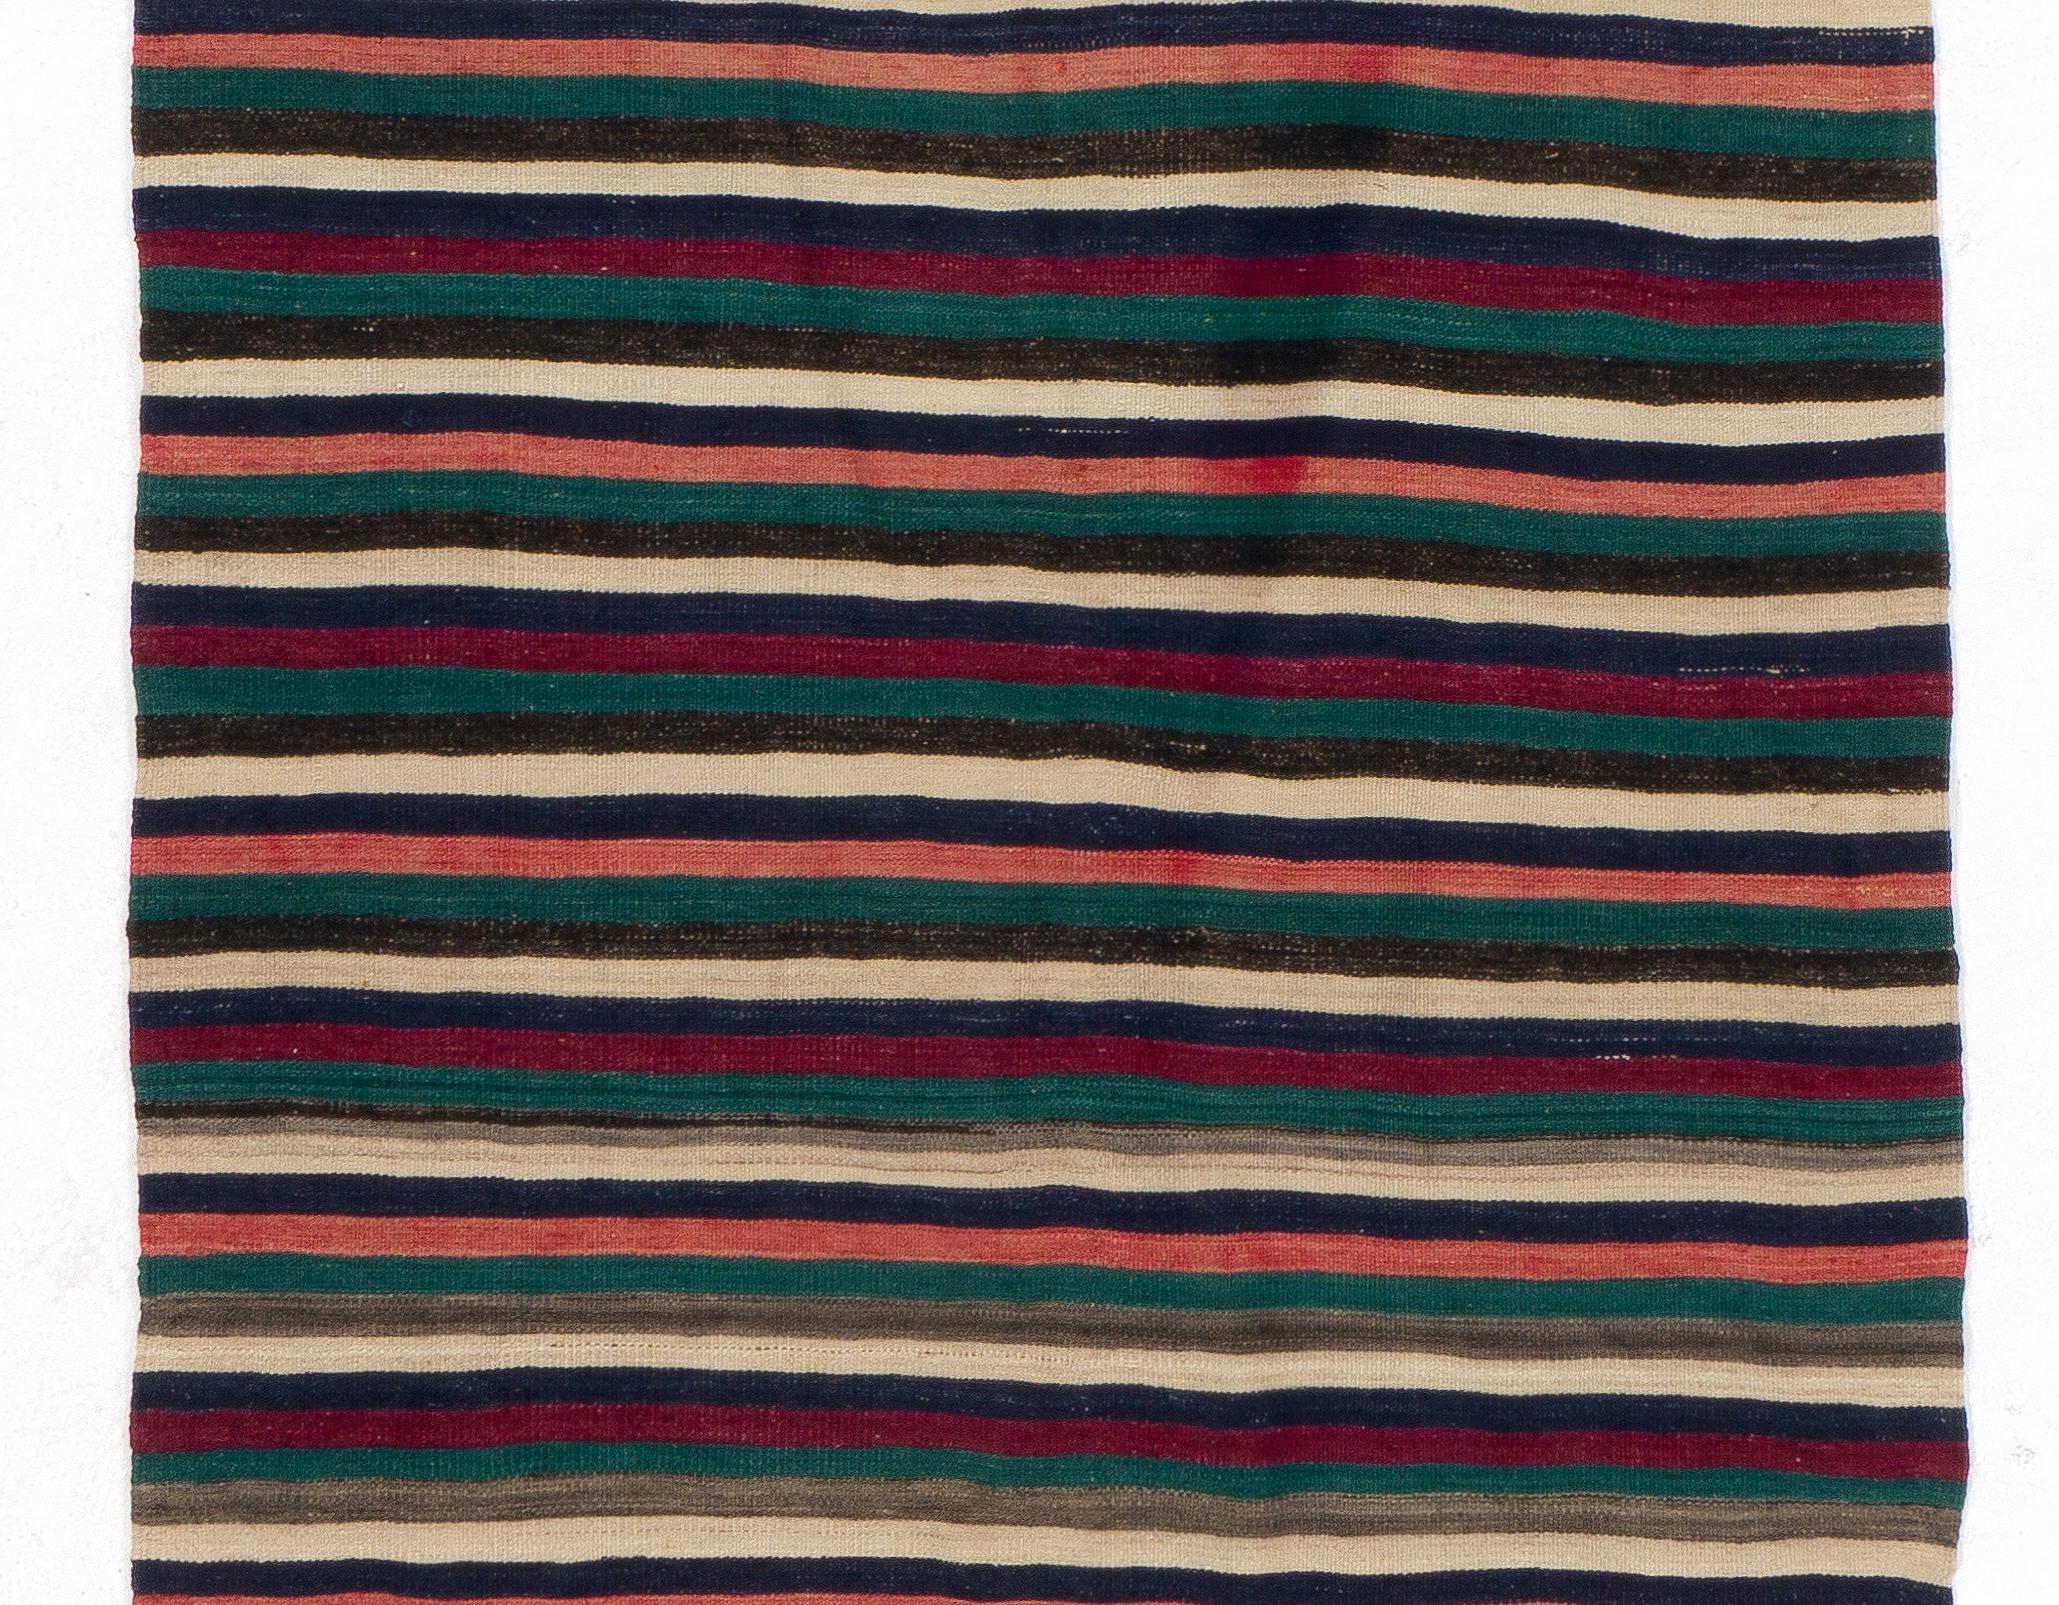 Colorful vintage handwoven flat-weave (Kilim) with striped design, 100% wool. Size: 4.7 x 11.8 Ft.
We can modify the dimensions if requested, i.e. make it shorter and/or narrower.
Reversible; both sides can be used. Sturdy and in good condition.